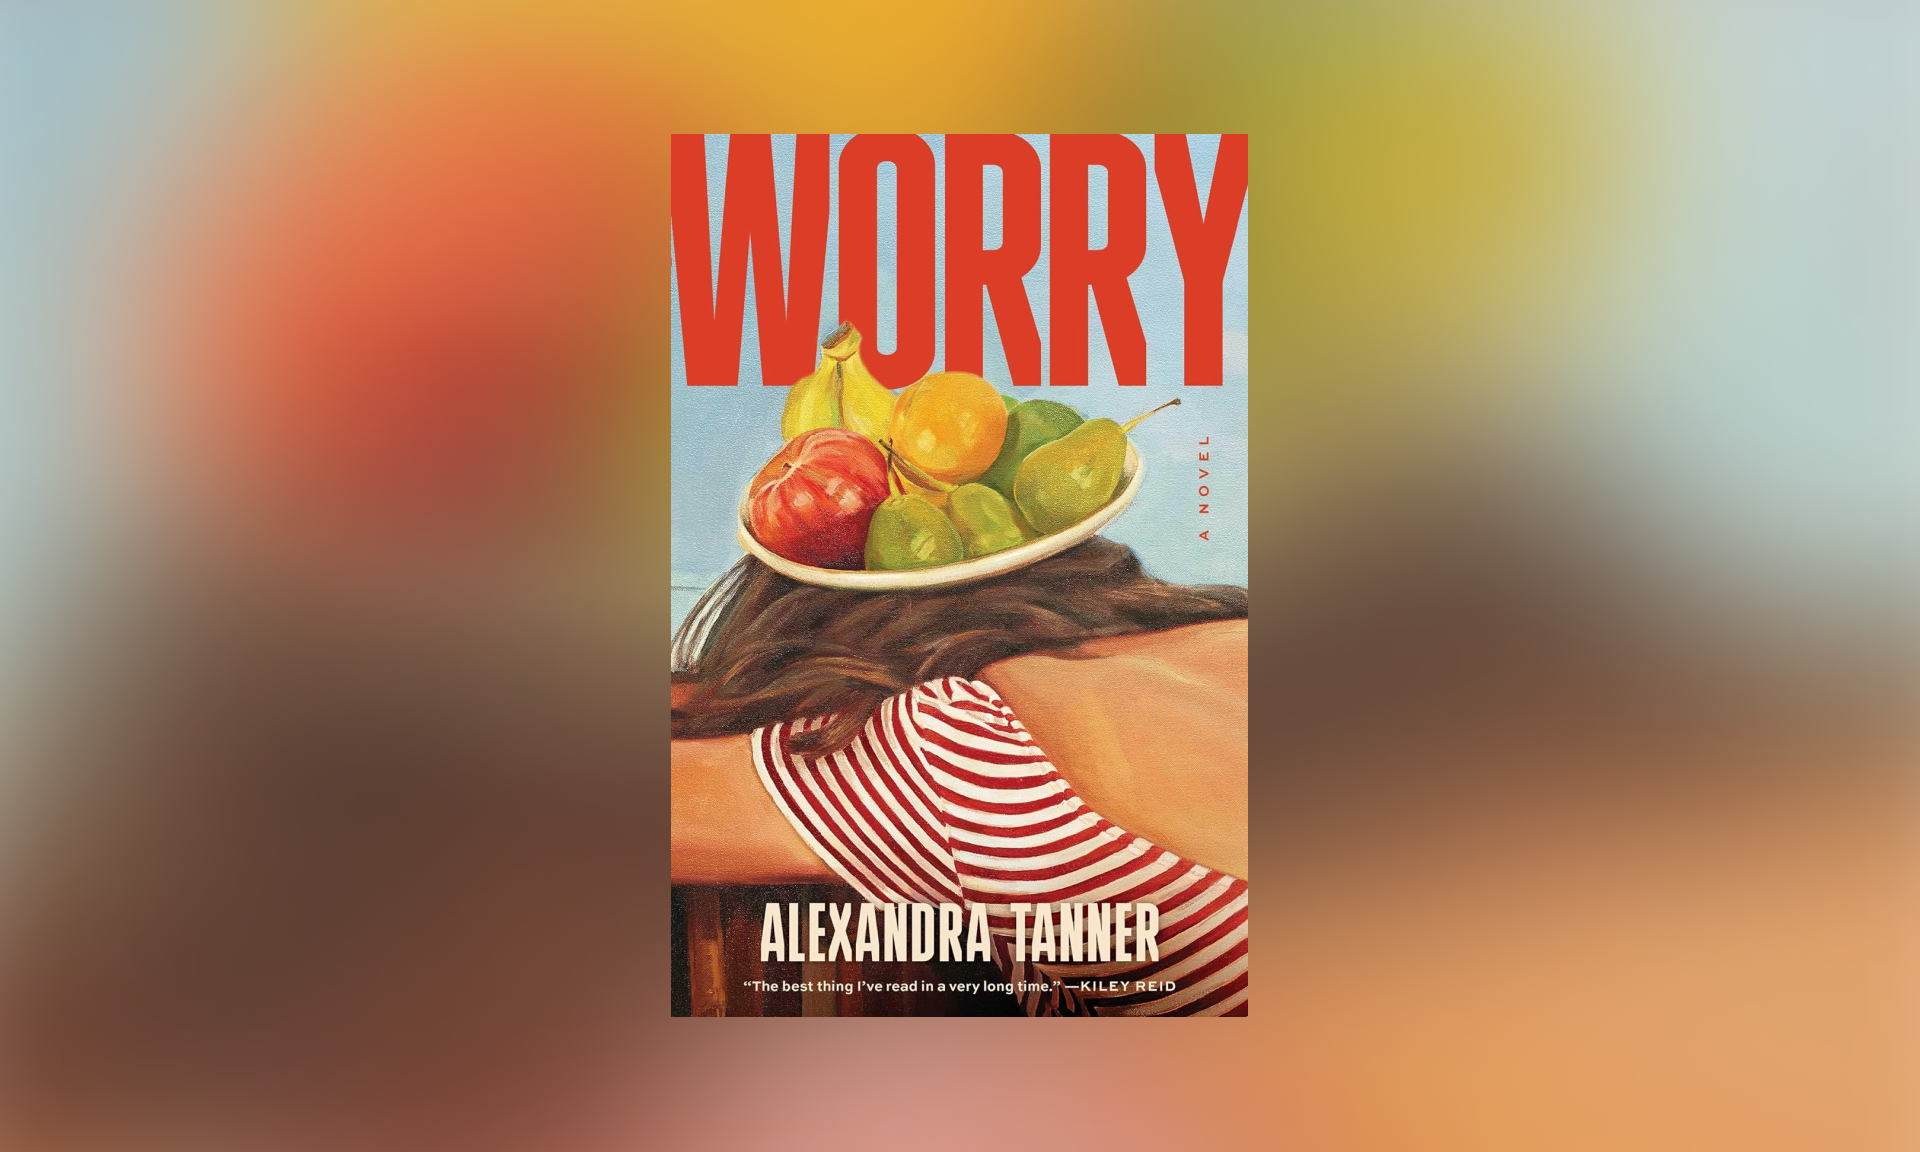 Cover art for "Worry" by Alexandra Tanner